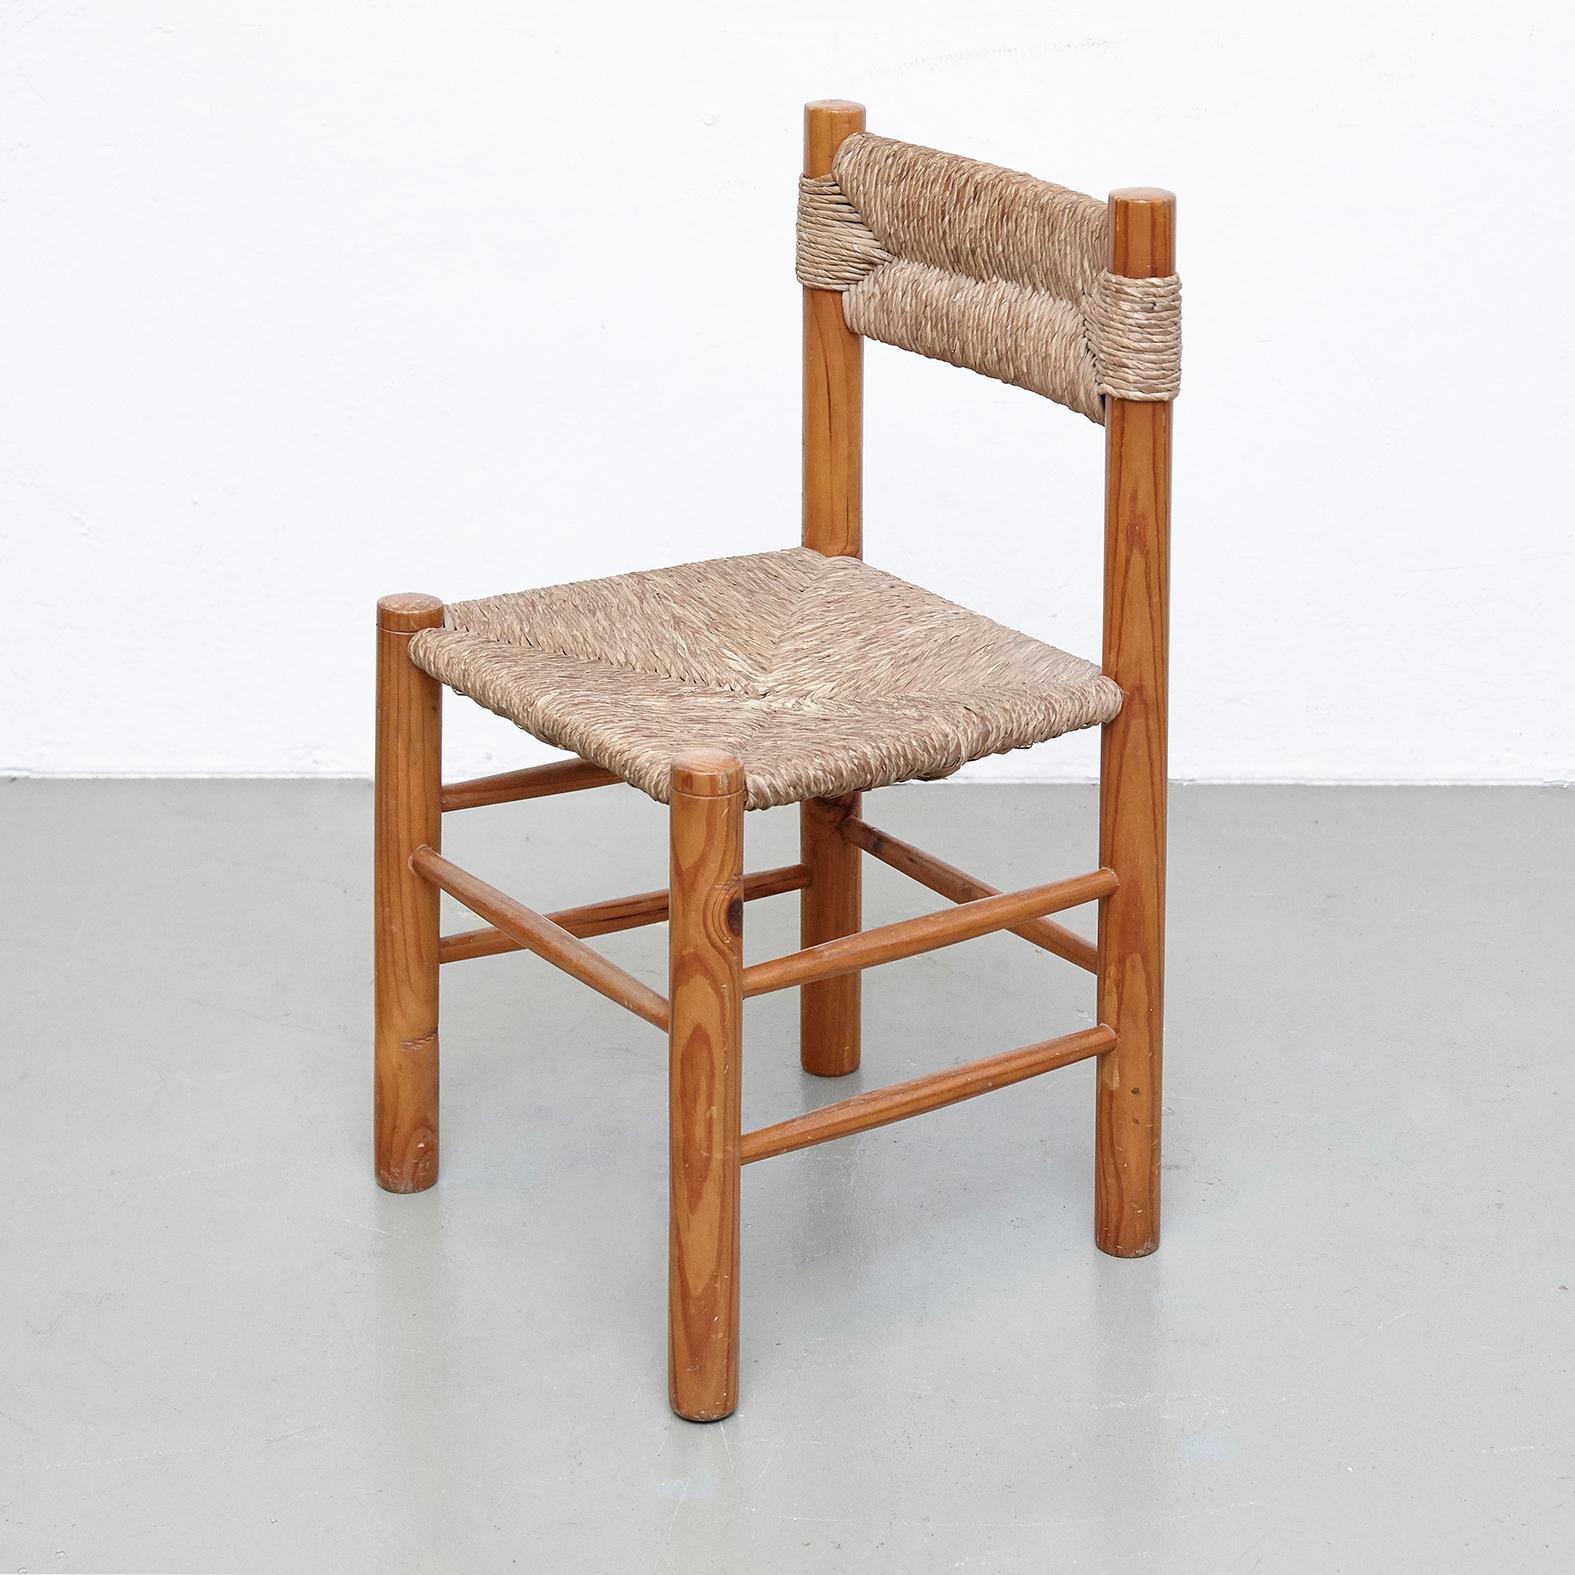 Pair of Chairs After Charlotte Perriand, Wood Rattan, Mid Century Modern 11